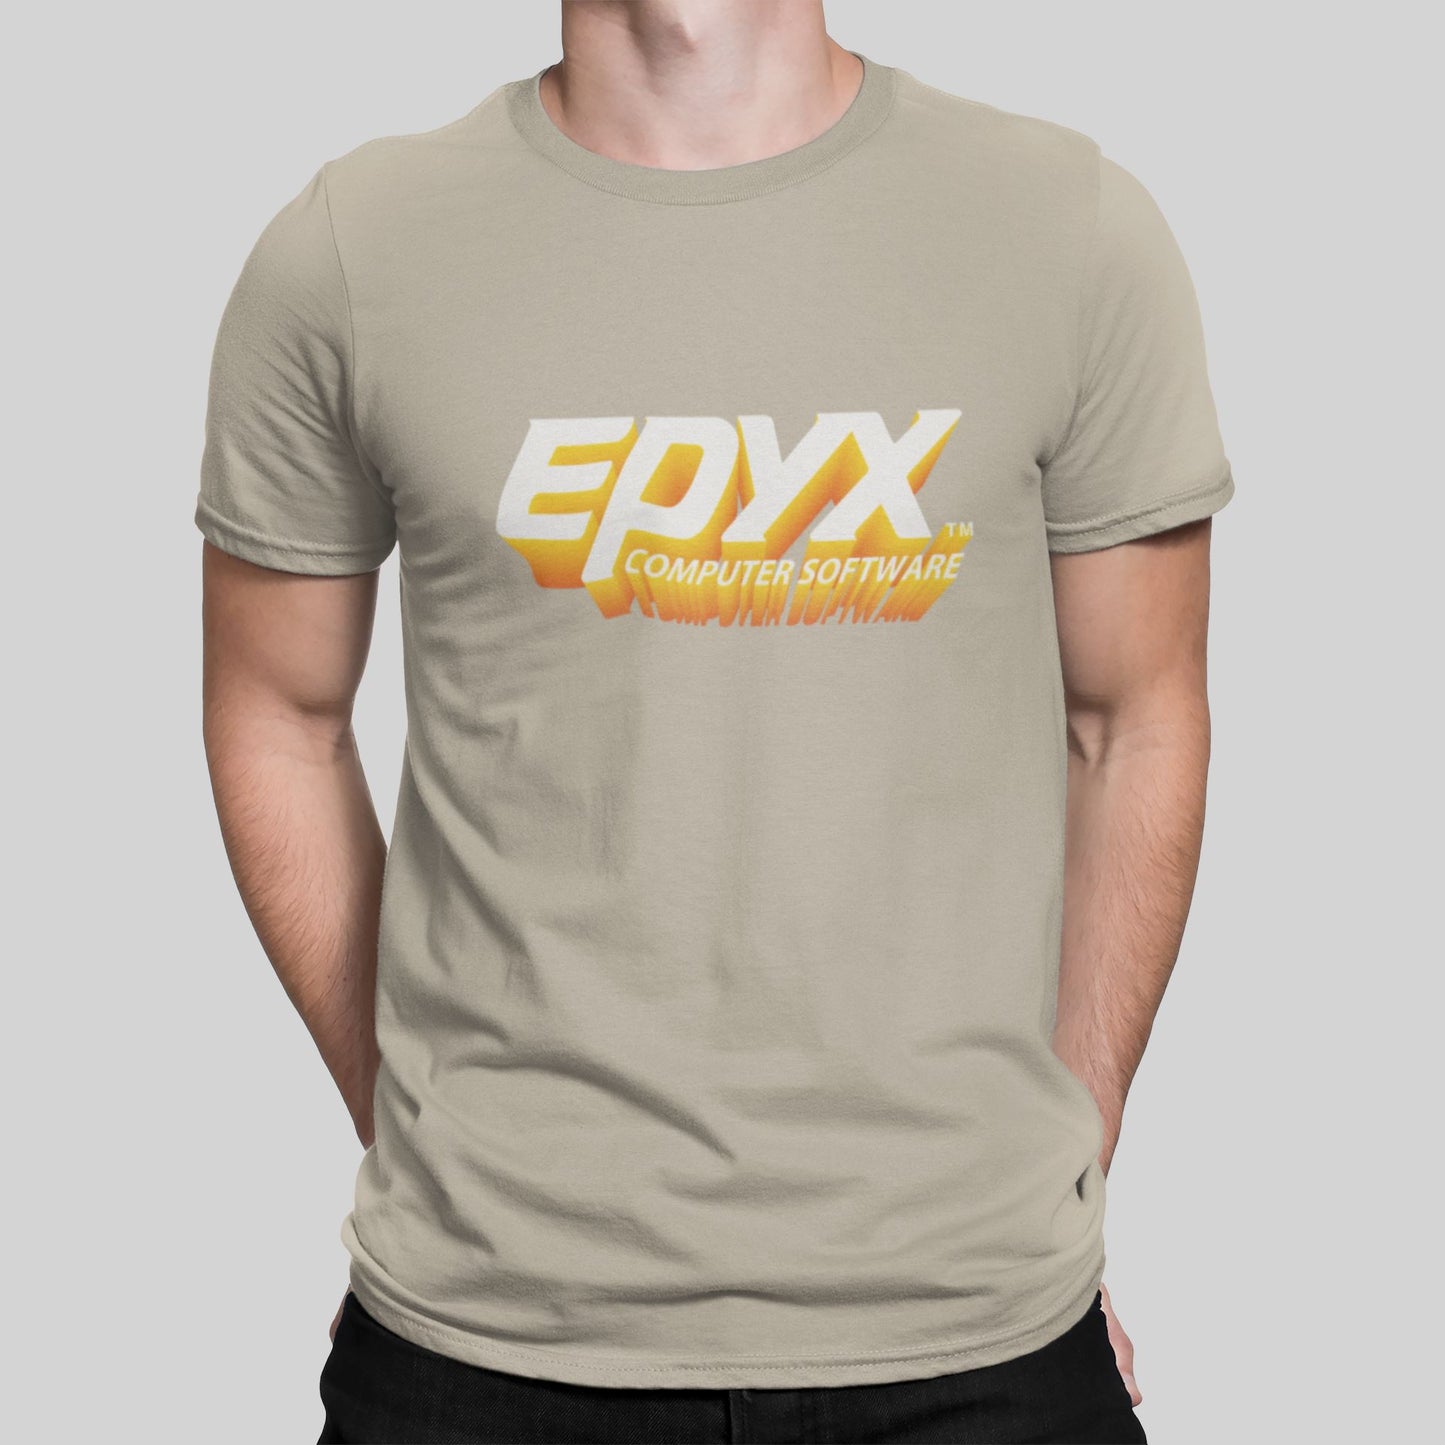 Epyx Software 3D Retro Gaming T-Shirt T-Shirt Seven Squared Small 34-36" Sand 